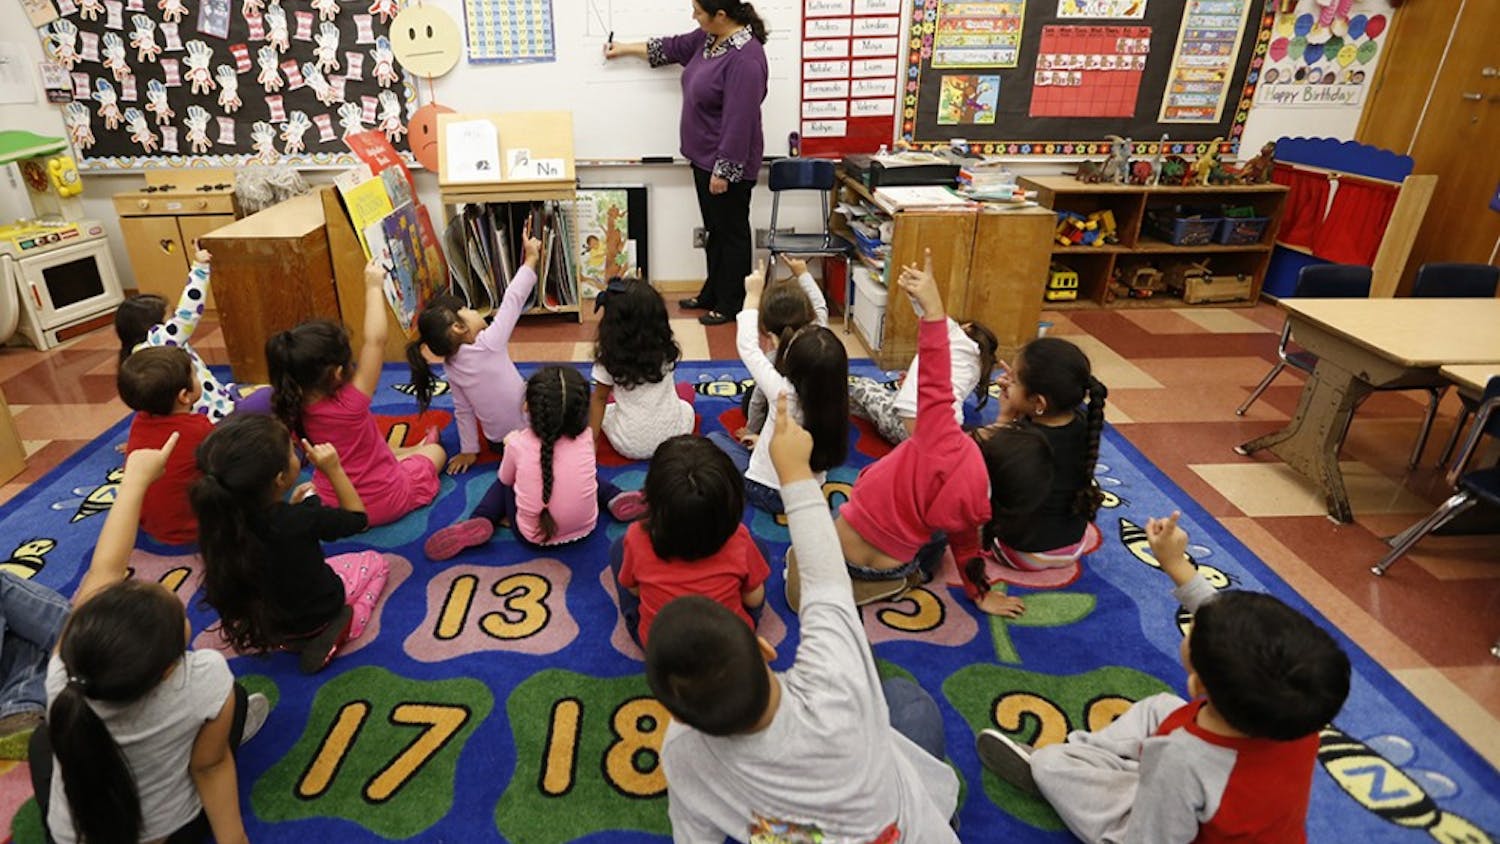 A kindergarten class at Dorris Place Elementary School in Los Angeles in May 2015. A study presented Wednesday, Sept. 28, 2016, to a meeting of education policy officials, researchers found that pre-K educators who were prompted to expect trouble in a classroom trained their gaze significantly longer on black students, especially boys. (Al Seib/Los Angeles Times/TNS)